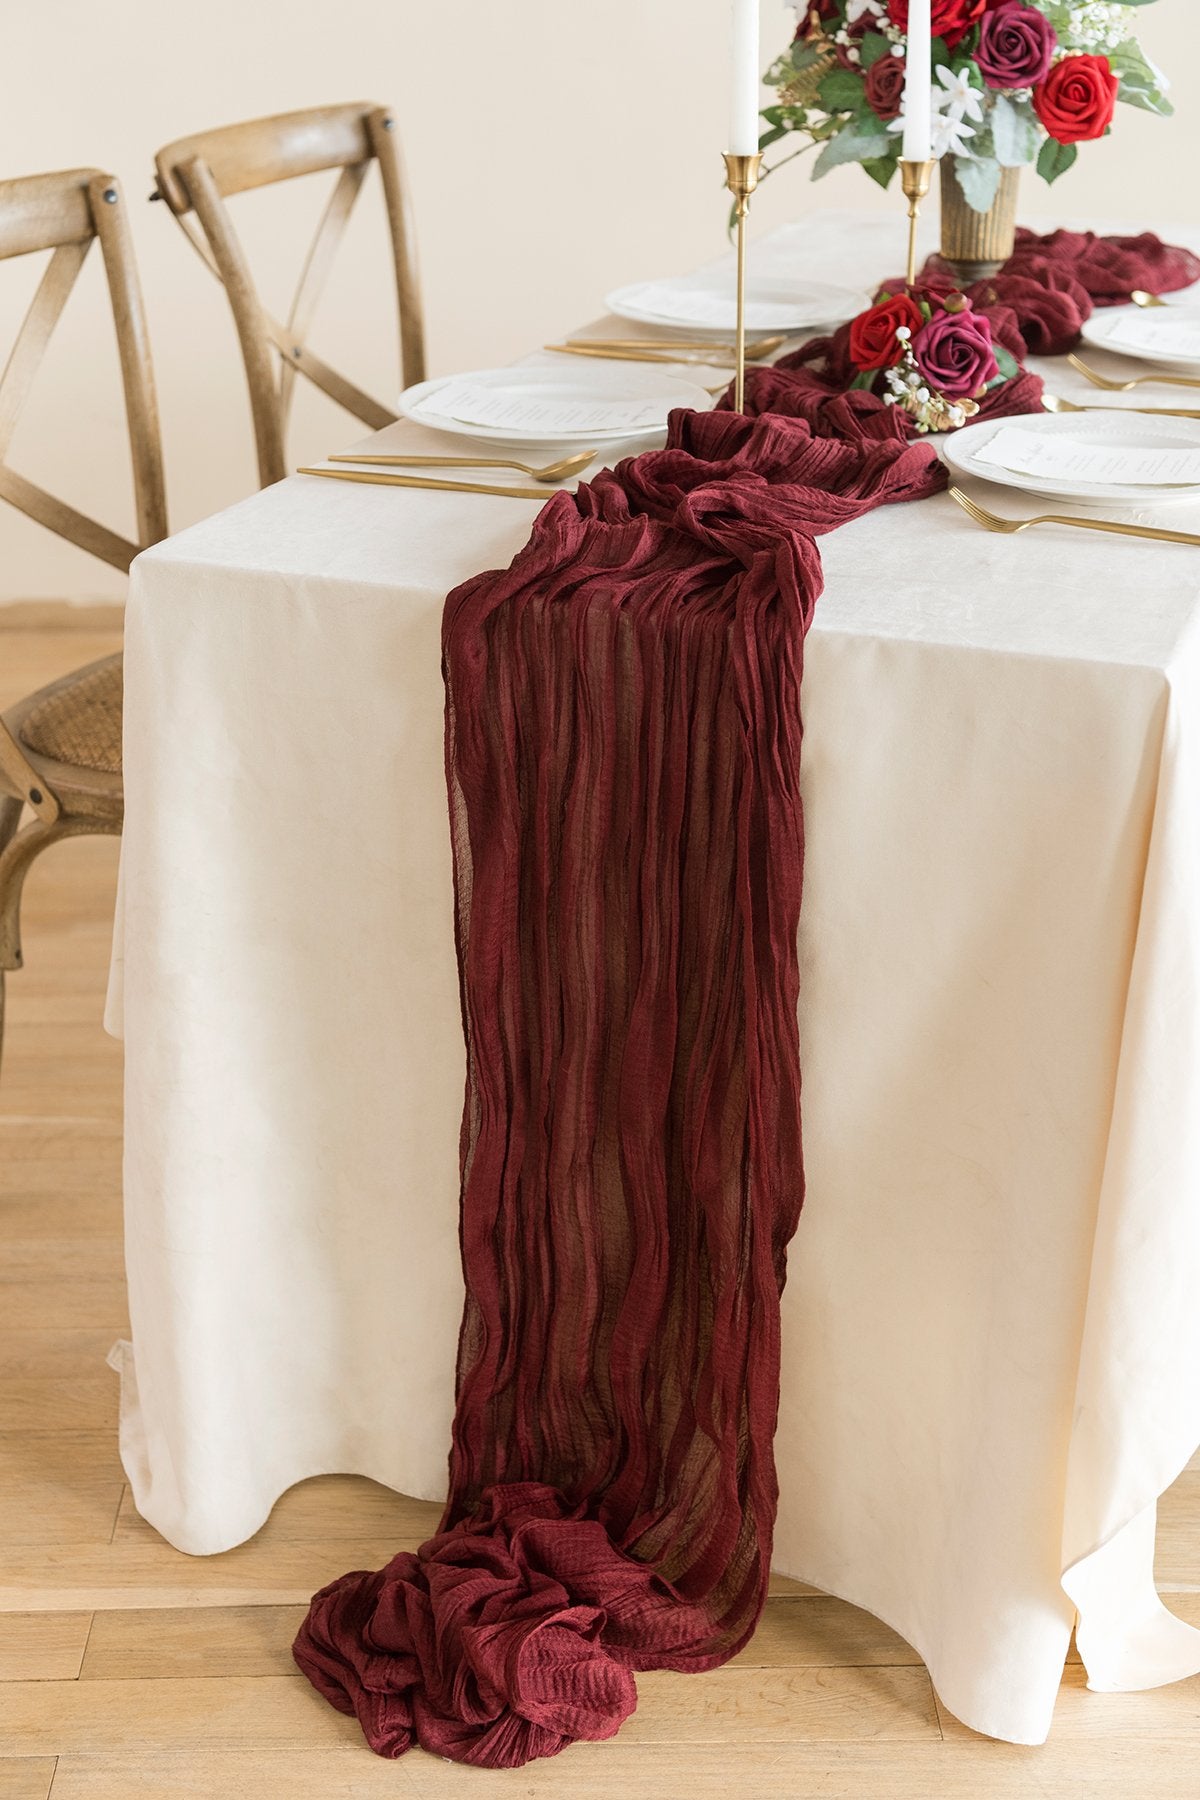 Rustic Gauze Cheesecloth Table Runner 30"w x 10FT - 7 colors - lingsDev